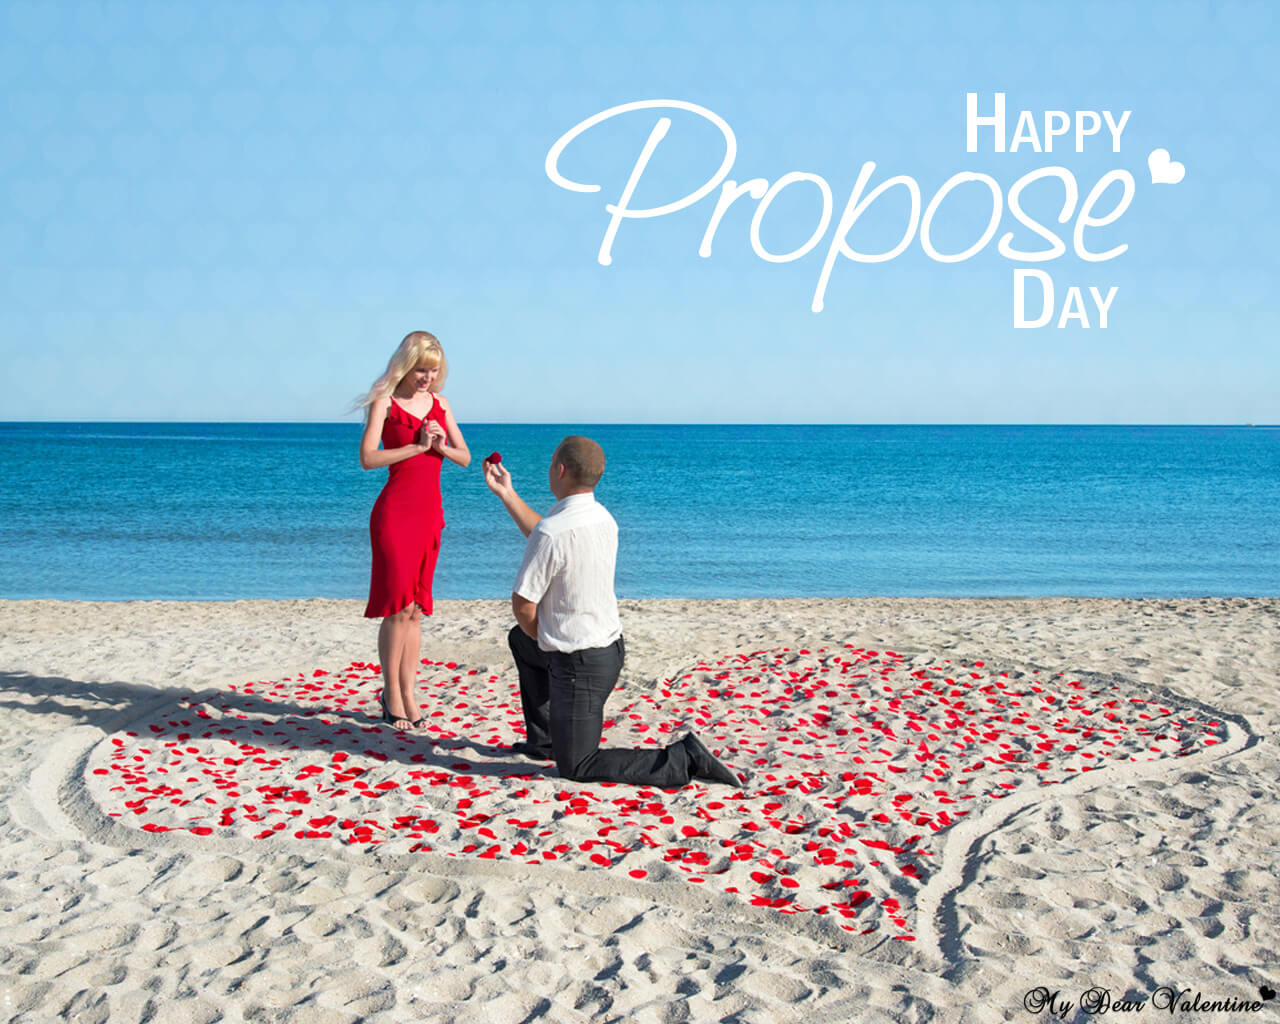 Propose Day Image Wallpaper Waiting For Your Proposal